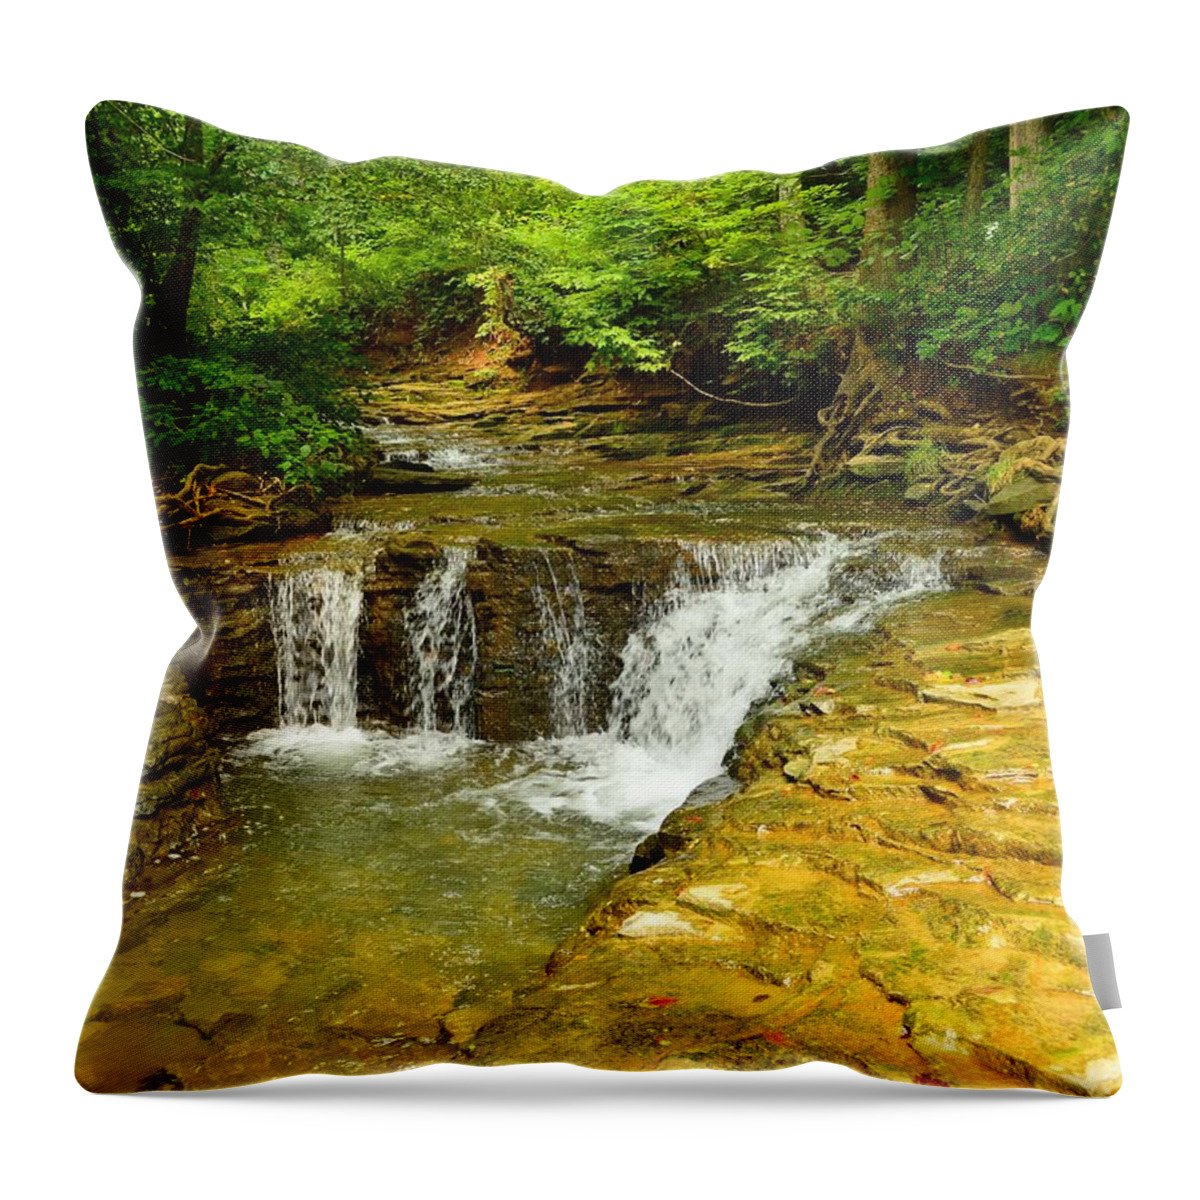 Saunder Springs Throw Pillow featuring the photograph Saunders Springs, Kentucky by Stacie Siemsen